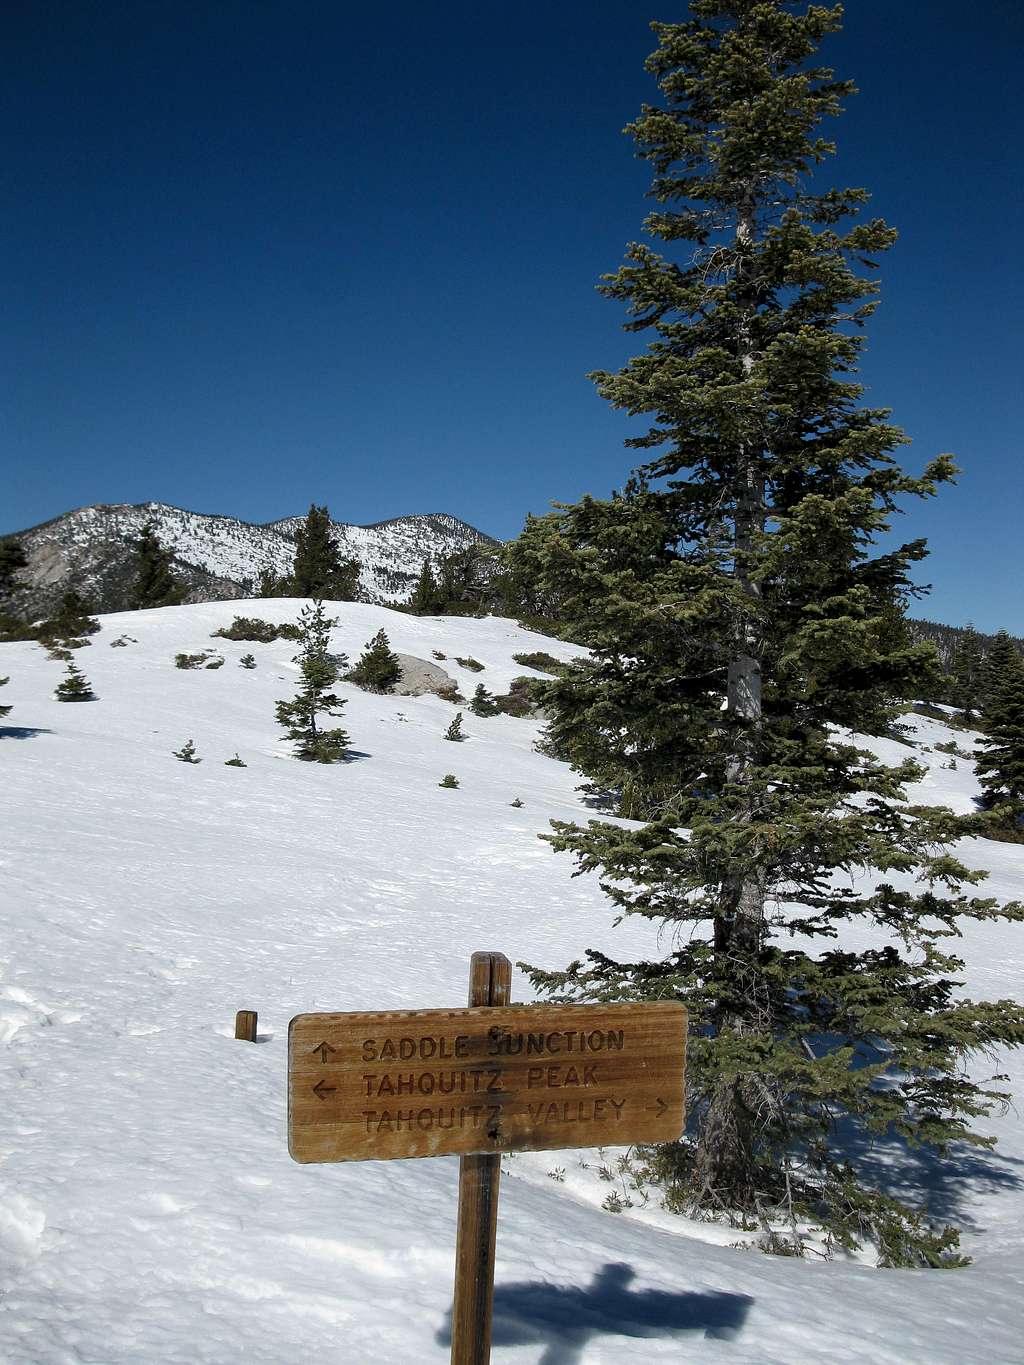 Trail Junction on the PCT